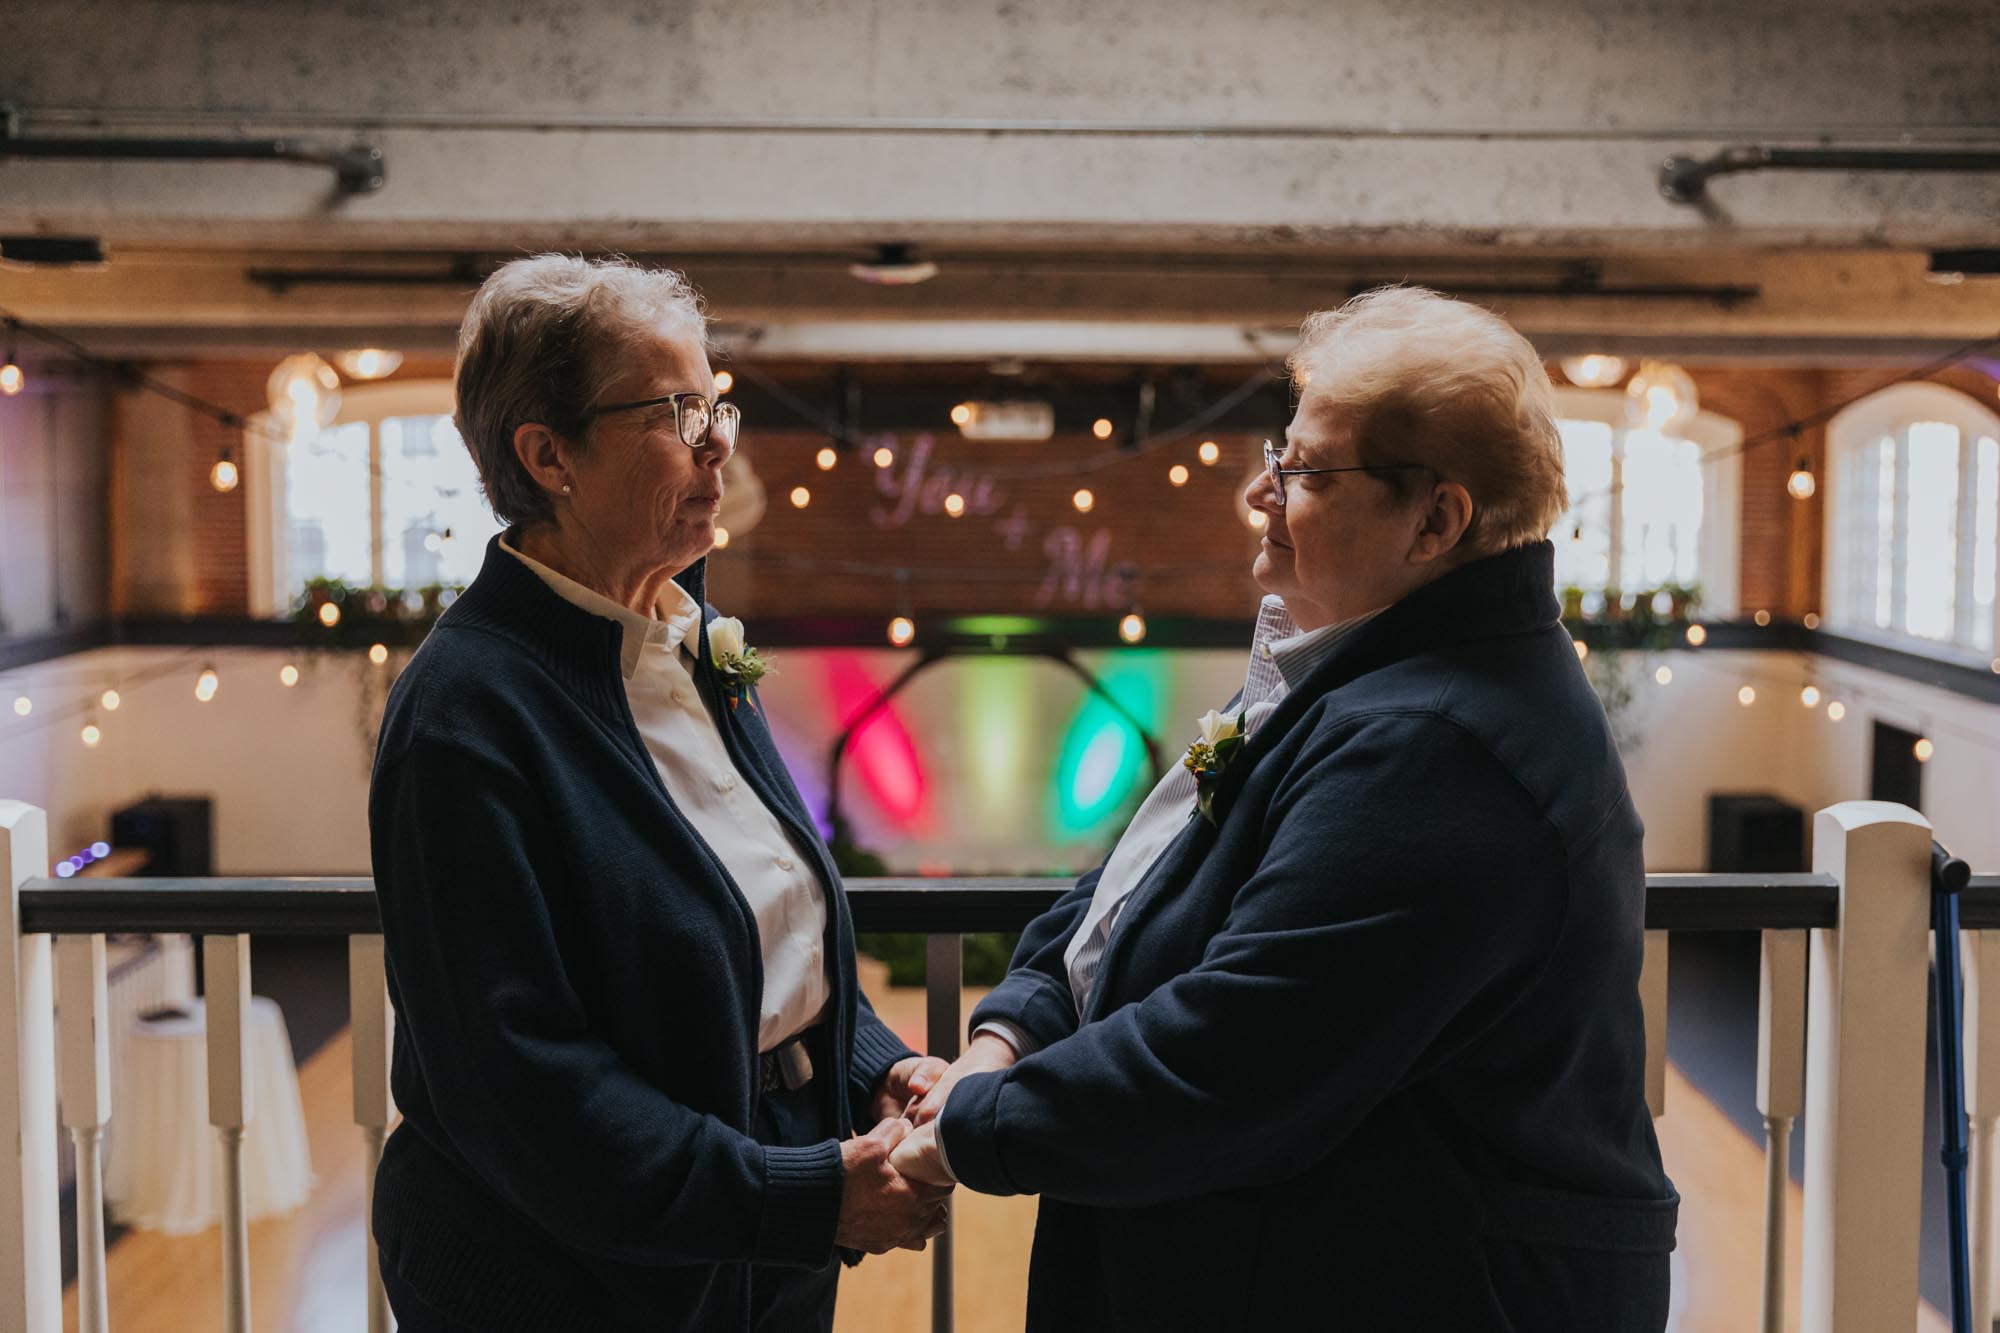 10 LGBTQ+ couples in Portland, Oregon tied the knot in a special Marriage-athon event photo